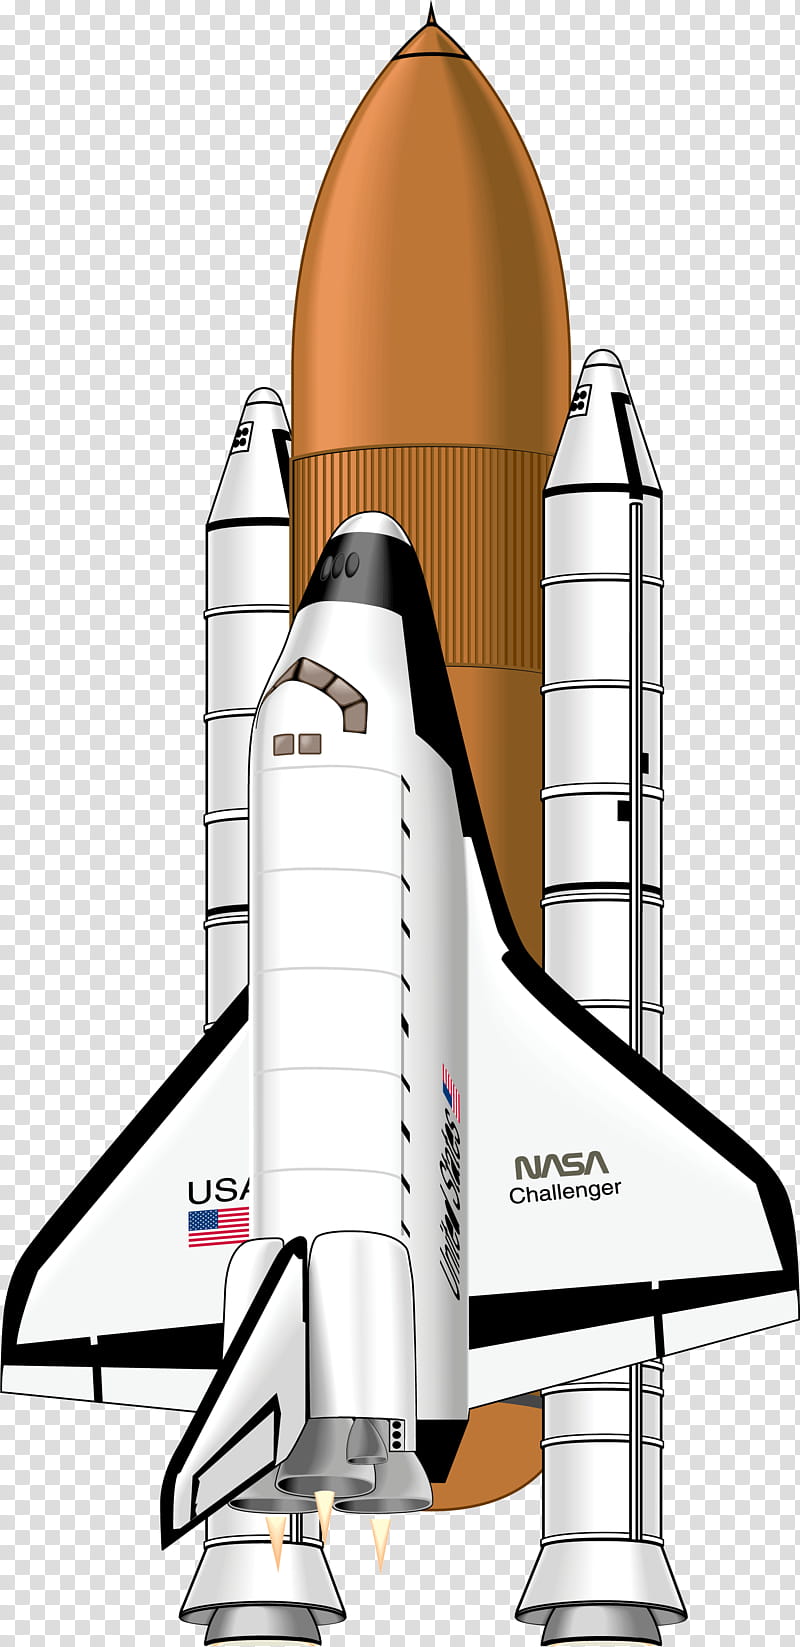 Space Shuttle, Space Shuttle Challenger Disaster, Space Shuttle Program, Teacher In Space Project, Nasa, Space Exploration, Outer Space, Space Shuttle Solid Rocket Booster transparent background PNG clipart